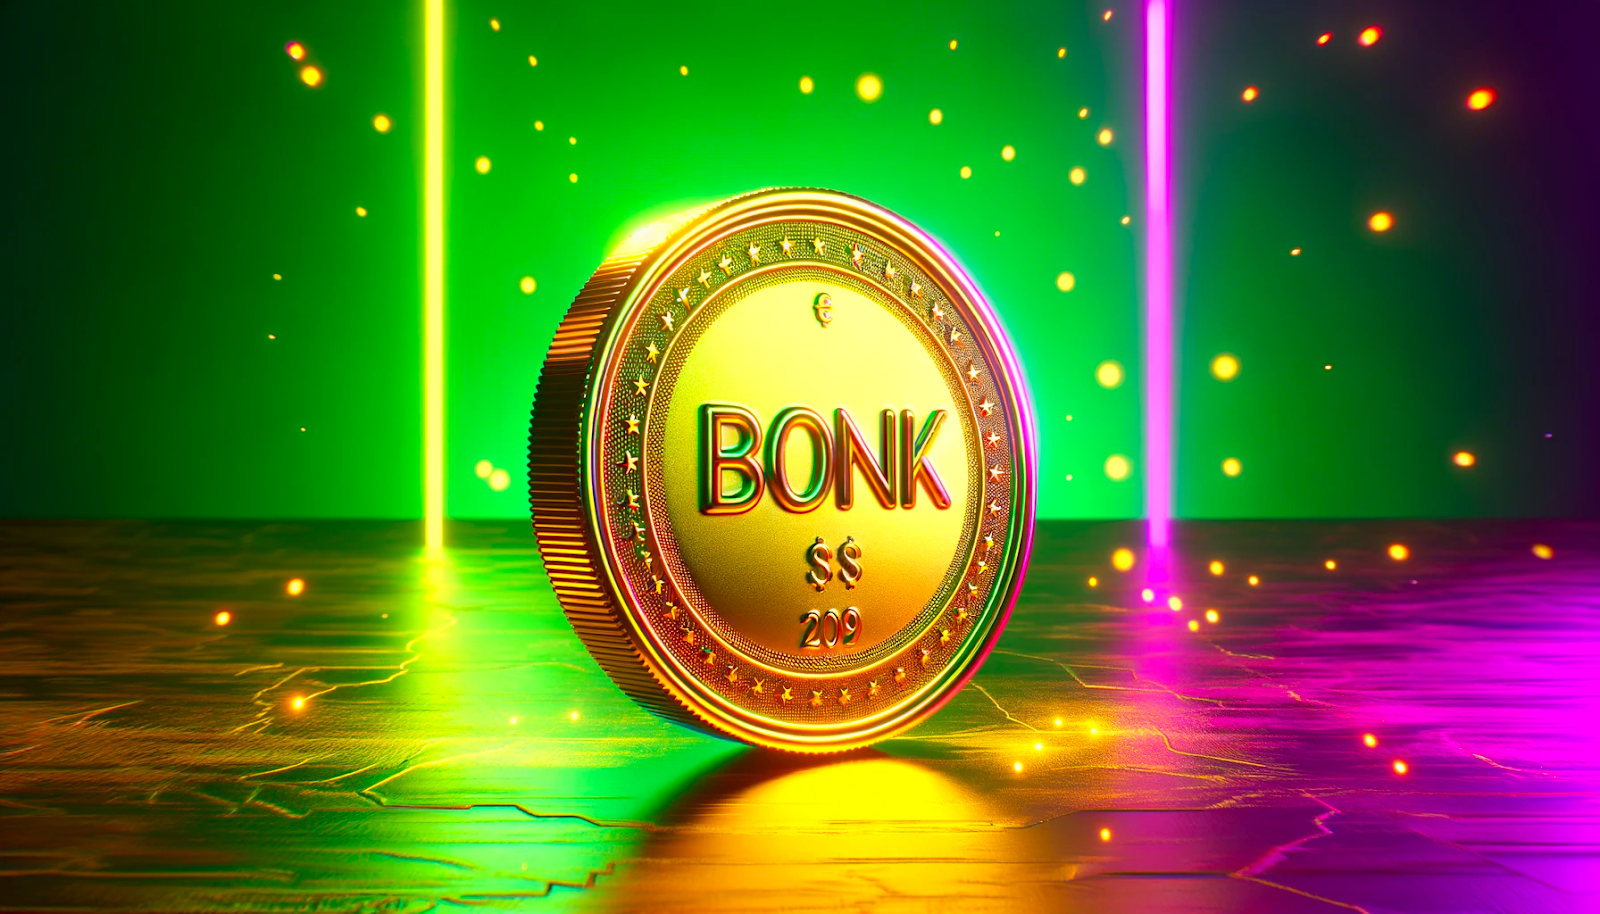 How to Buy BONK Coin (In 6 Easy Steps)